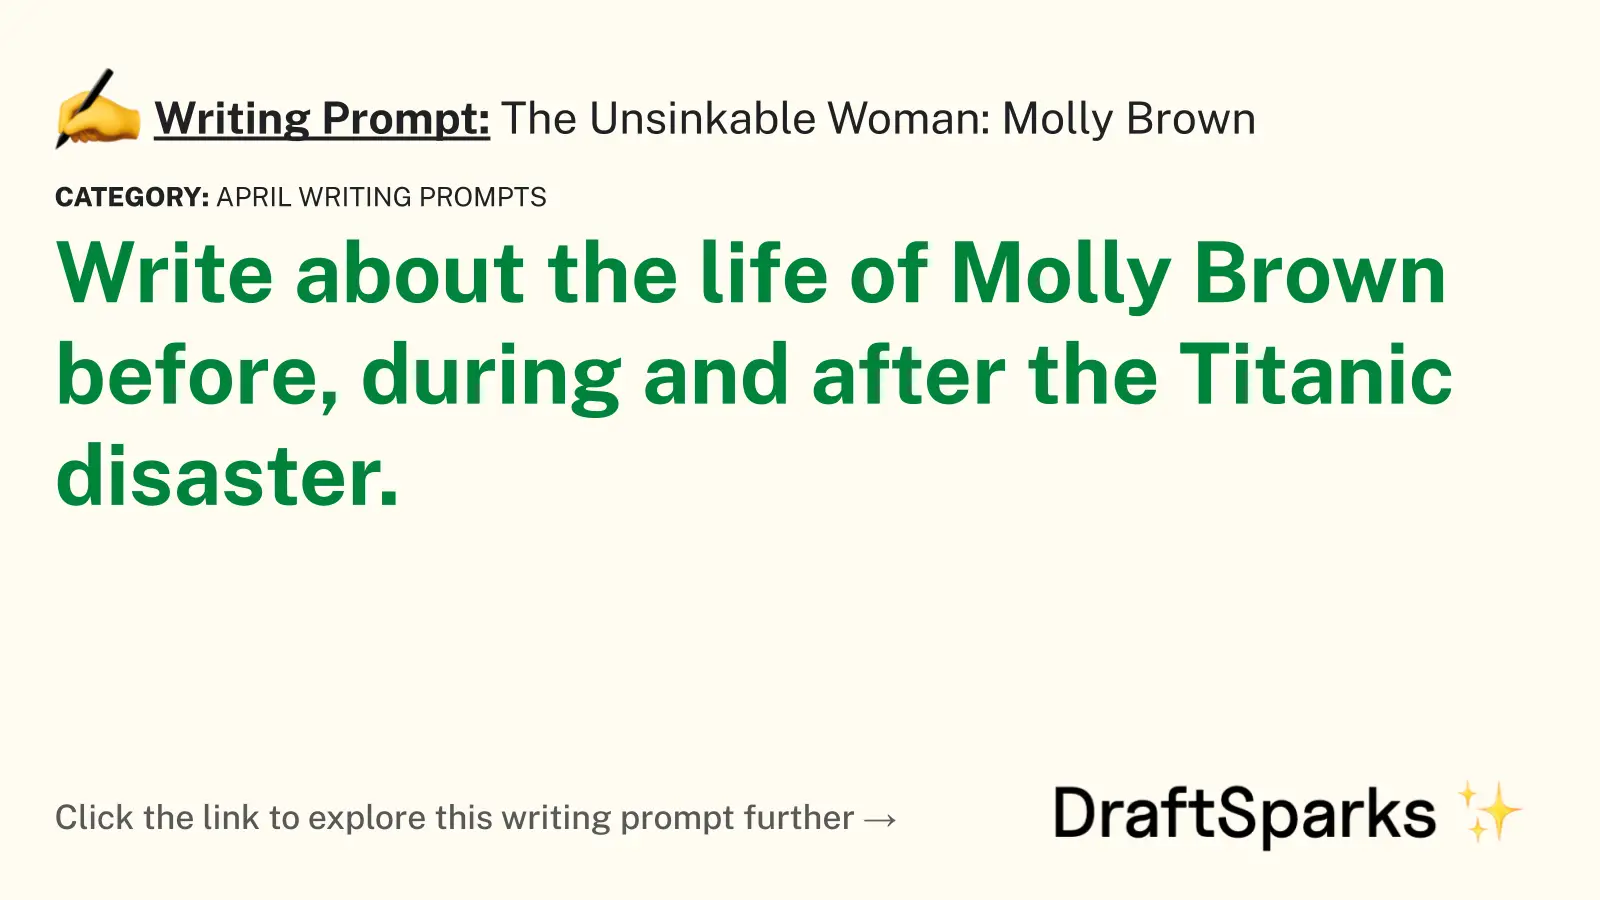 The Unsinkable Woman: Molly Brown